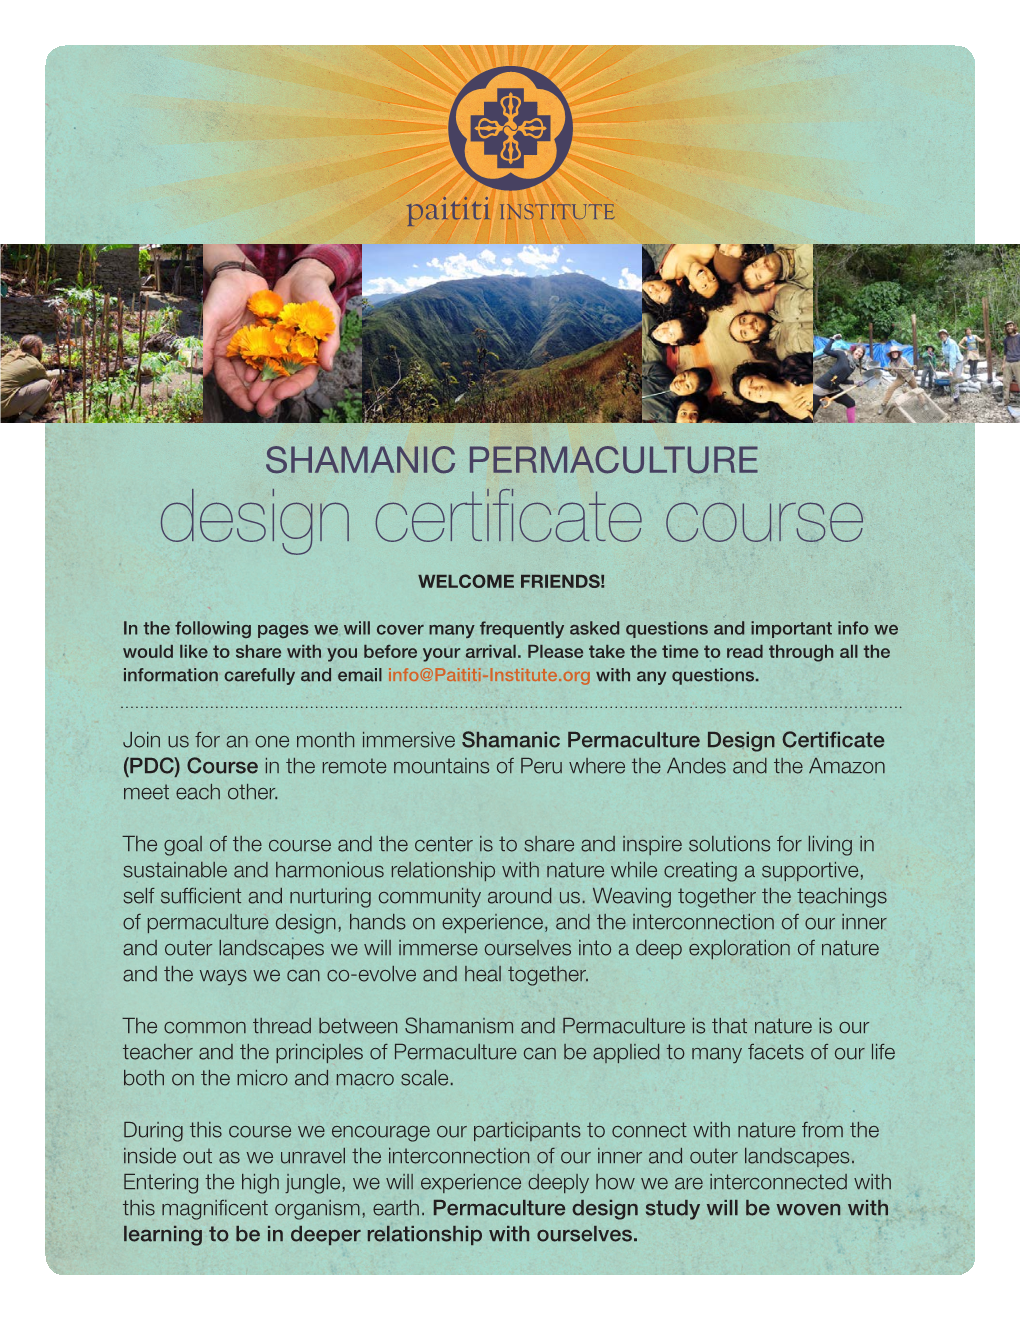 Shamanic Permaculture Design Certificate Course (PDC) 1